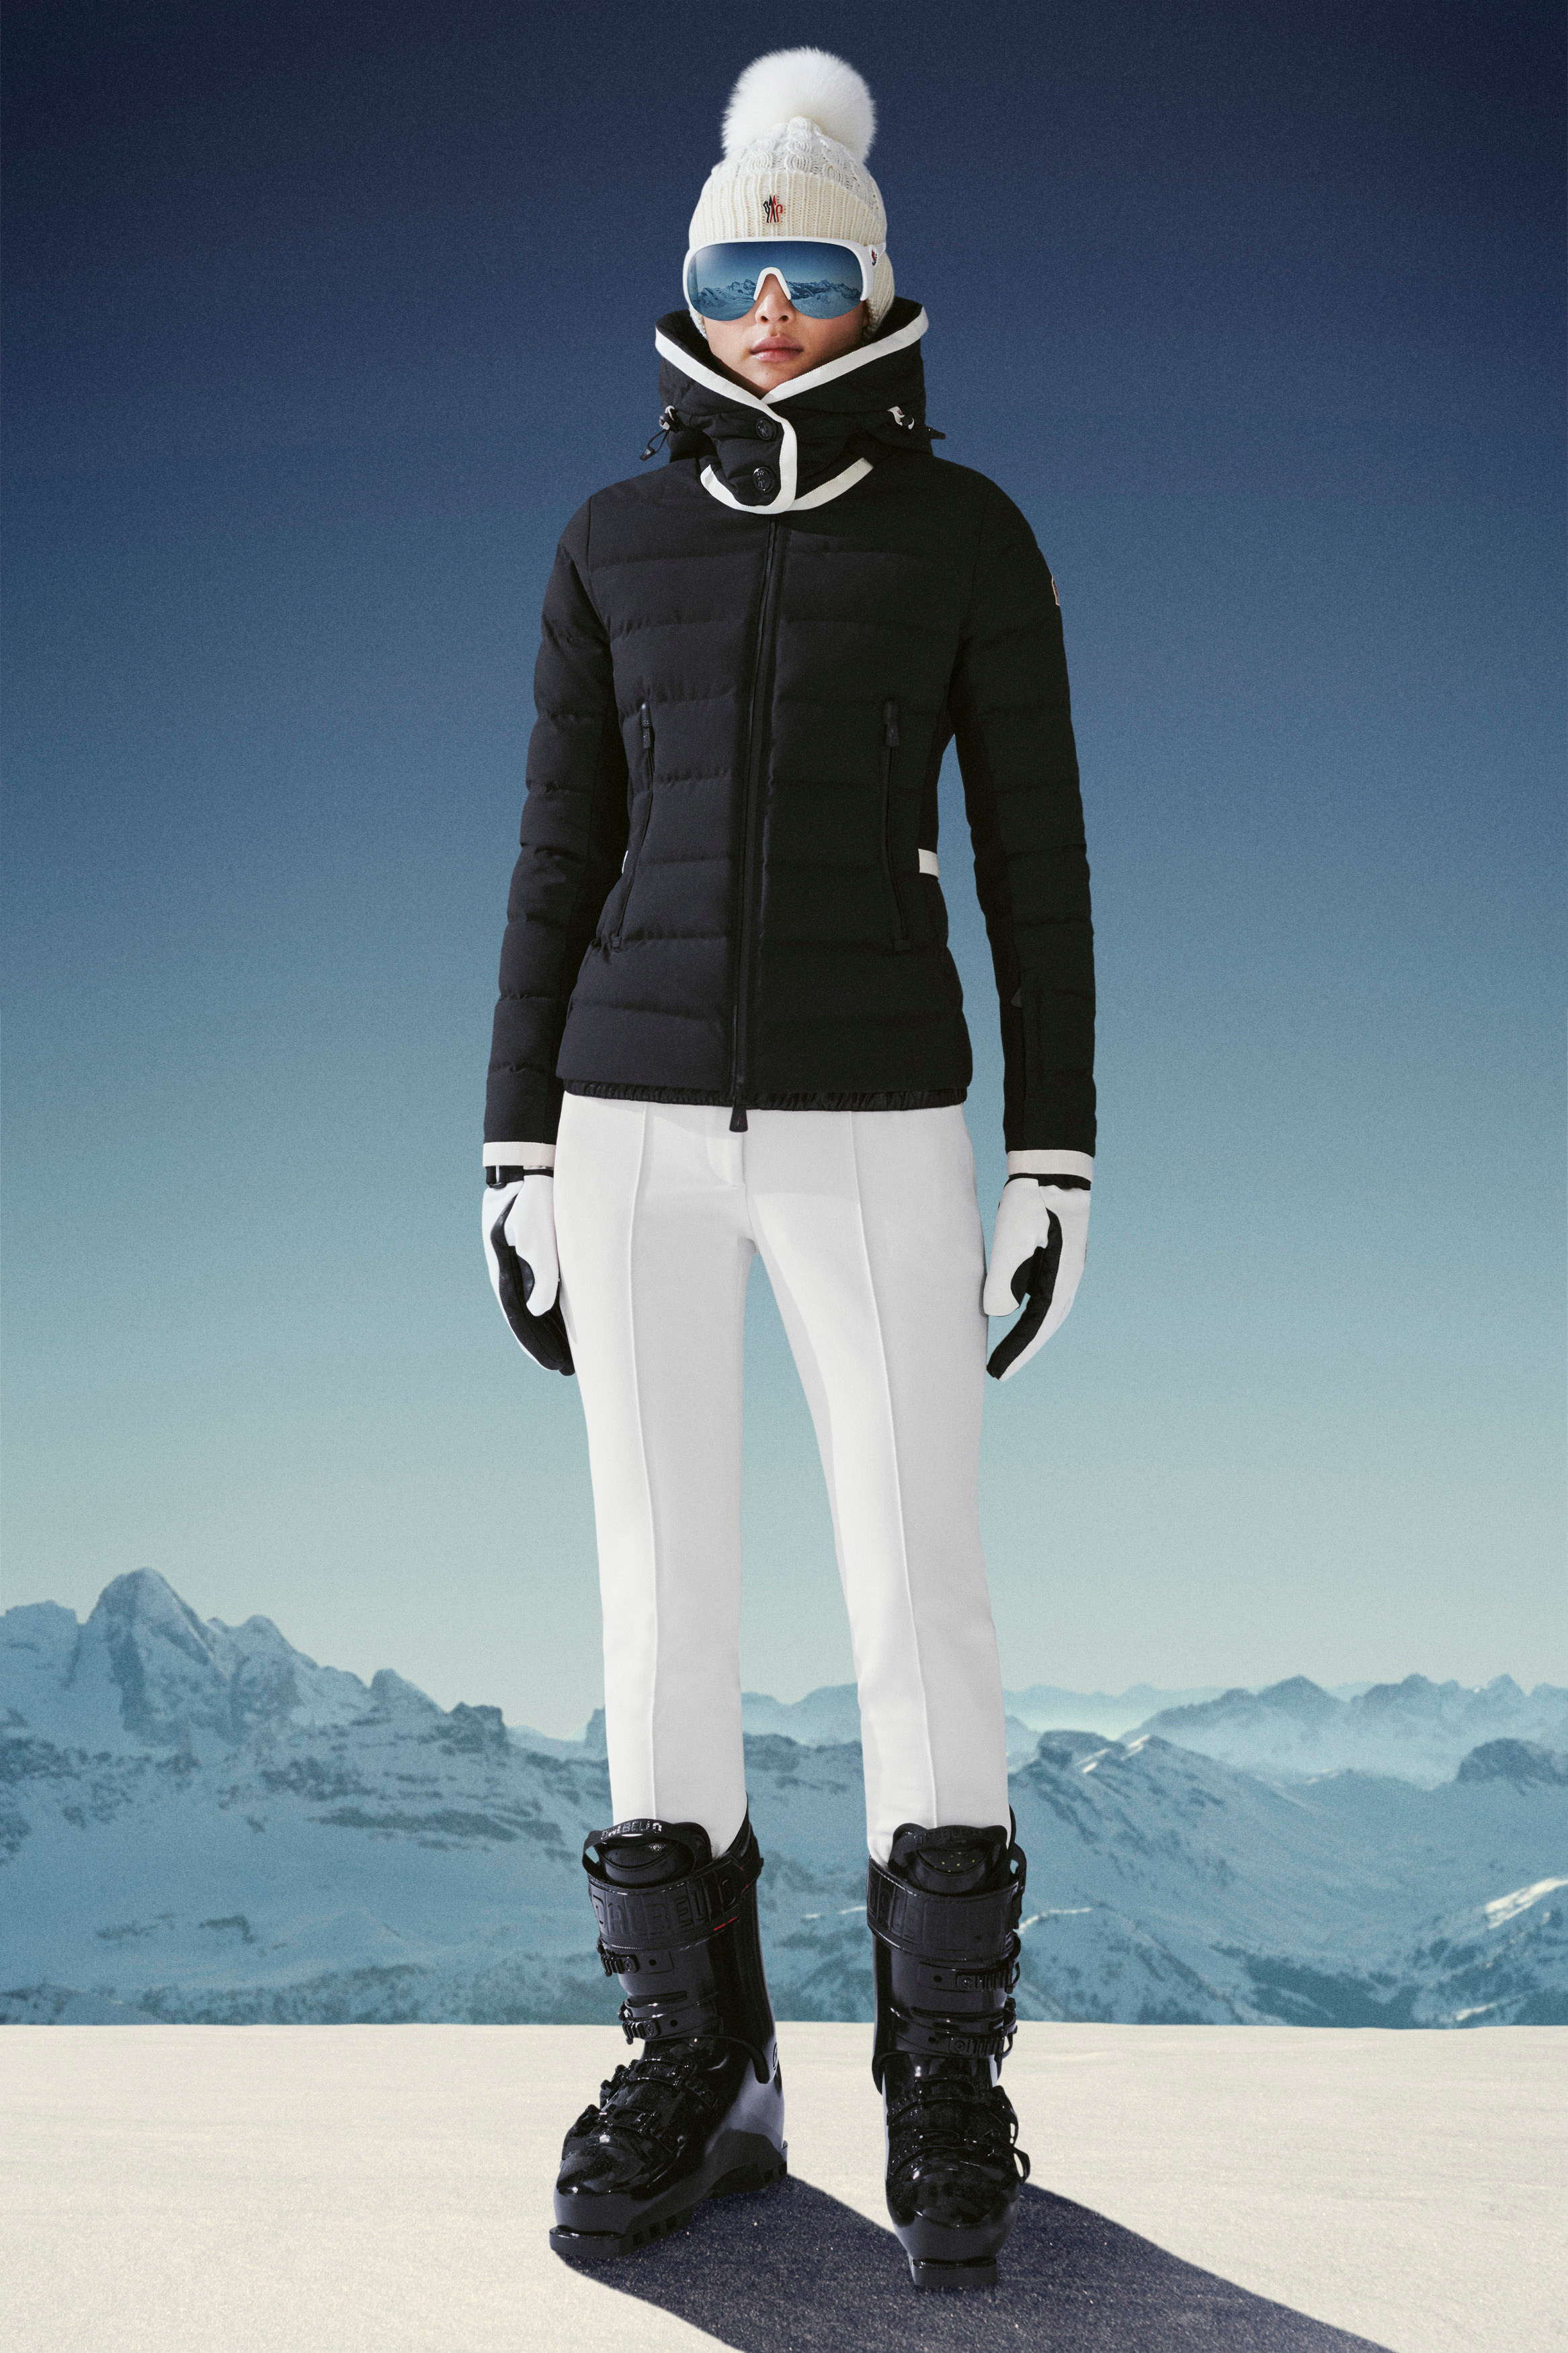 Notes from the slopes: Turn heads this winter with the best